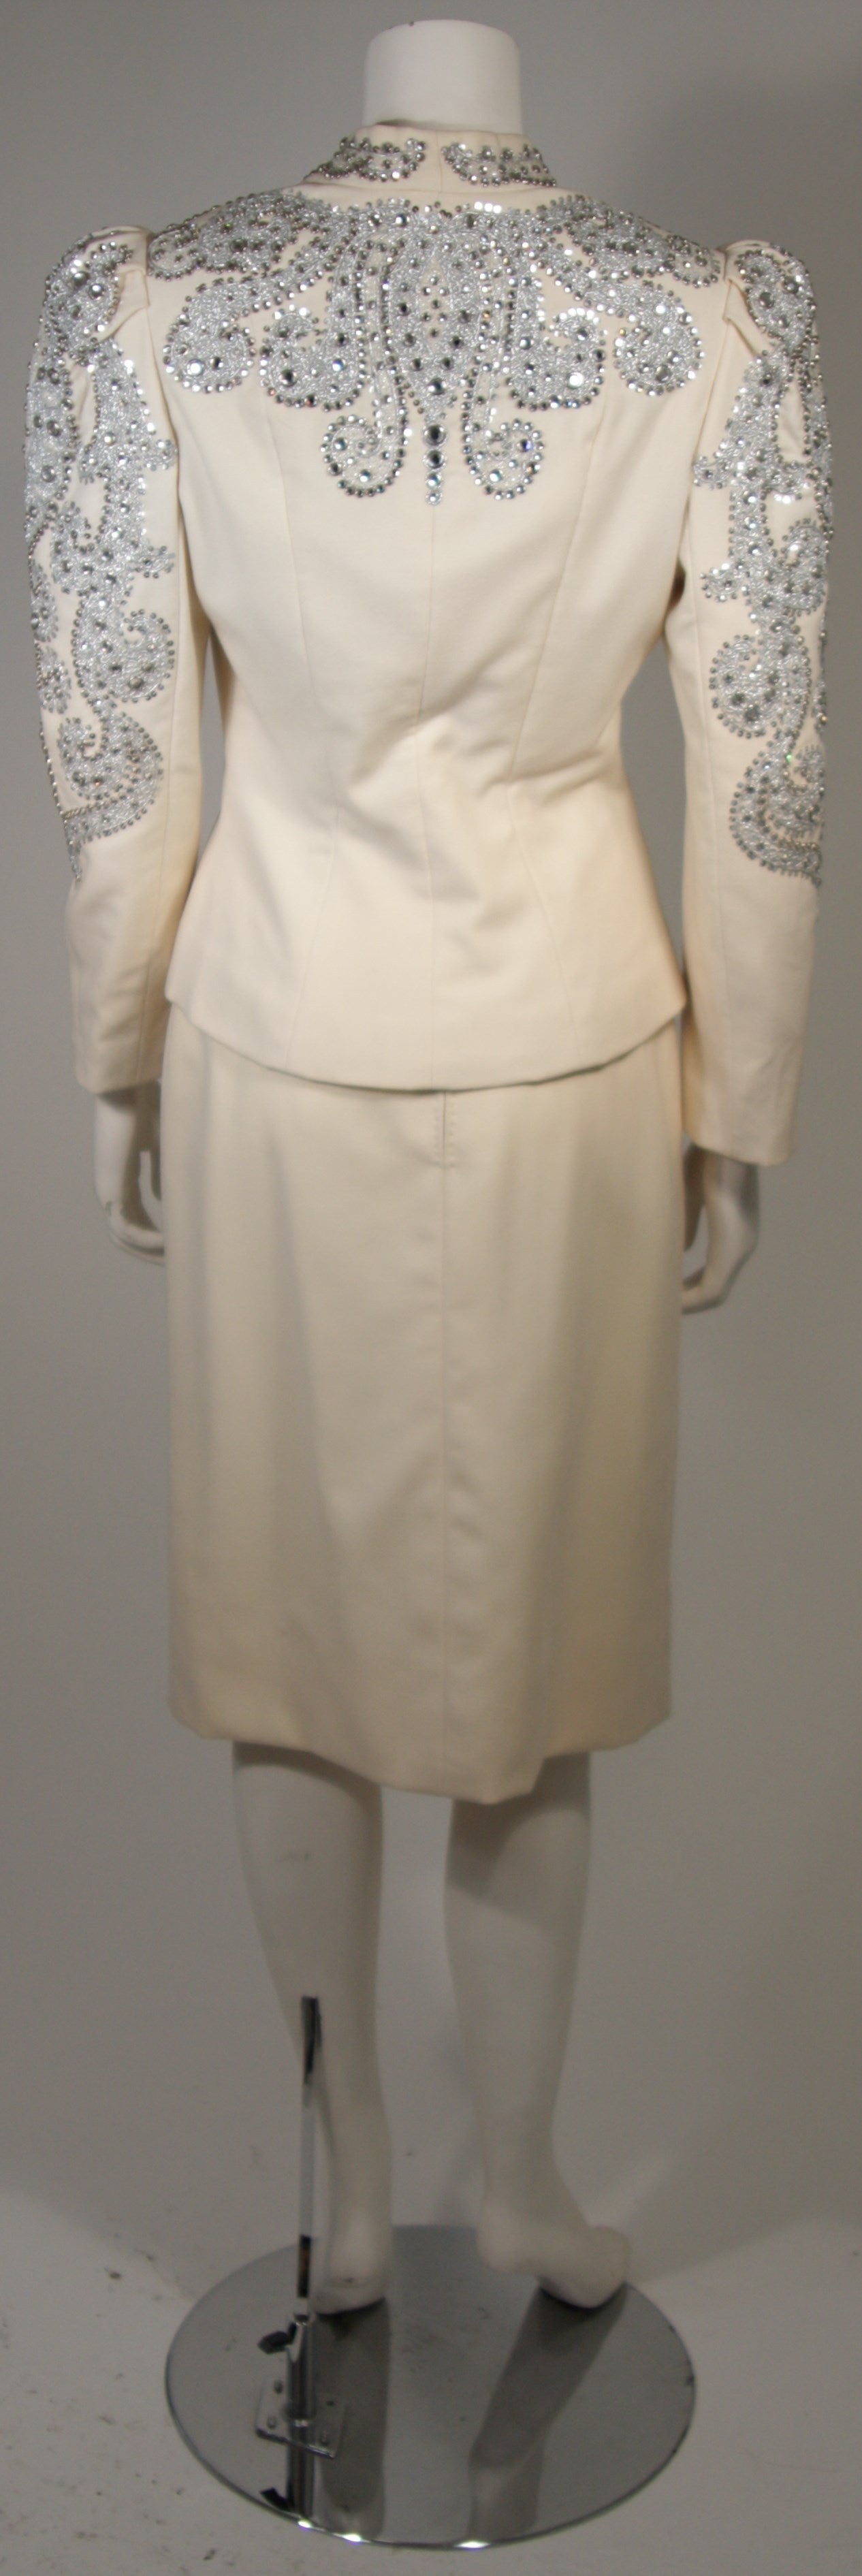 Nolan Miller Couture Embellished Ivory Wool Skirt Suit Size Small 1